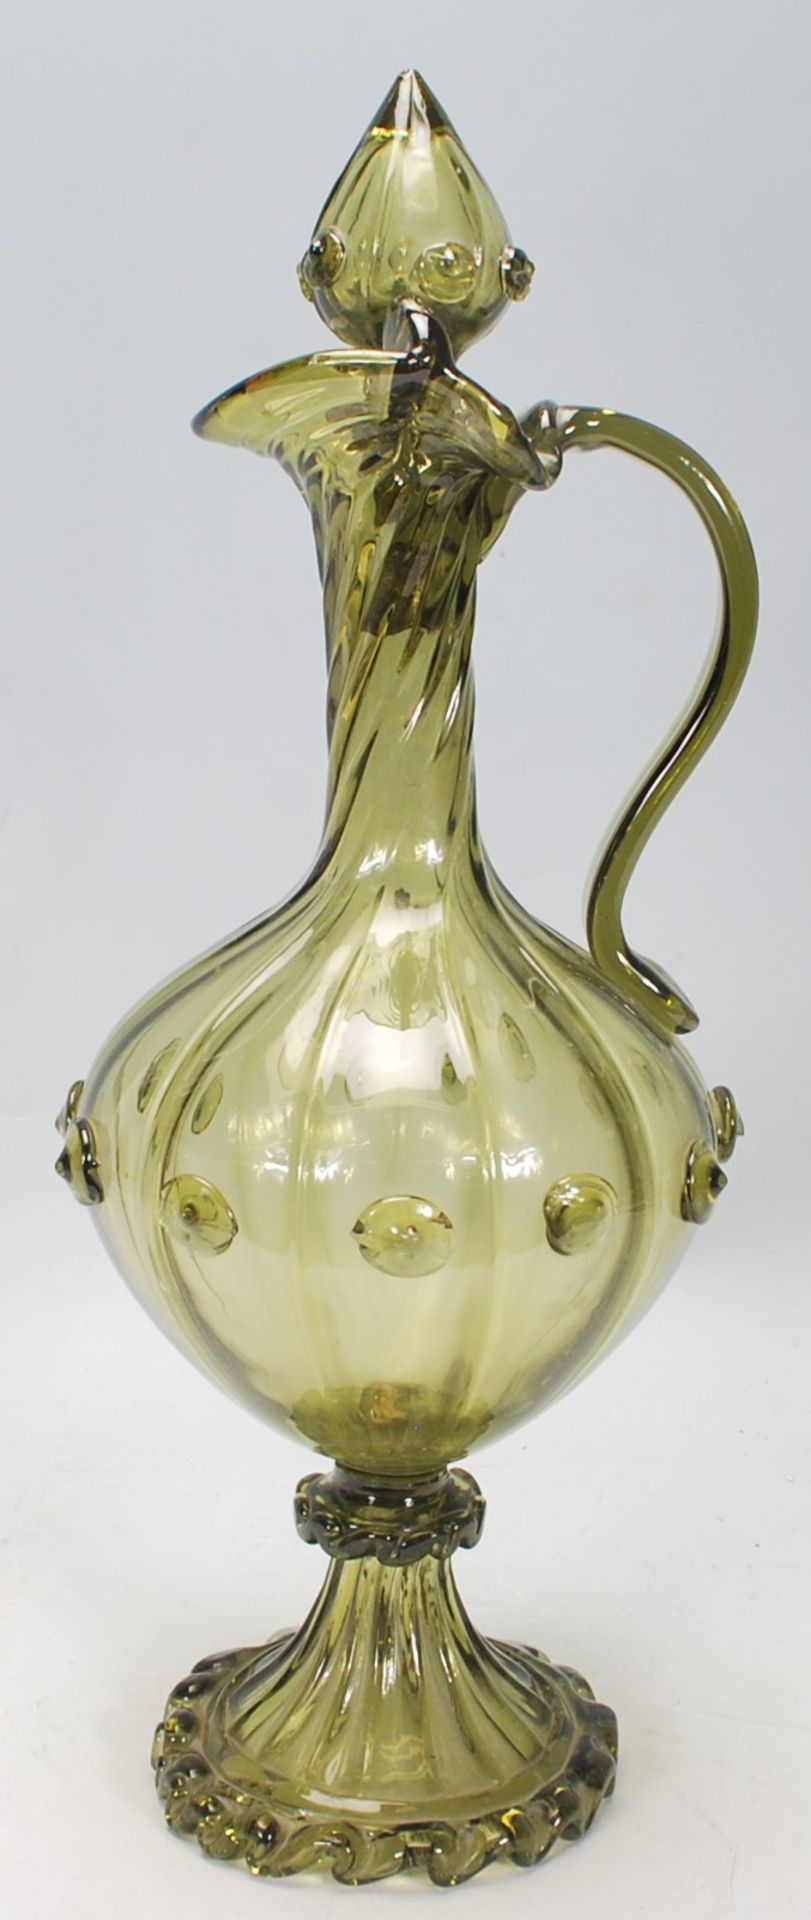 A 20th Century Murano green glass ewer jug having a reeded bulbous form body with a twisted neck, - Image 5 of 6